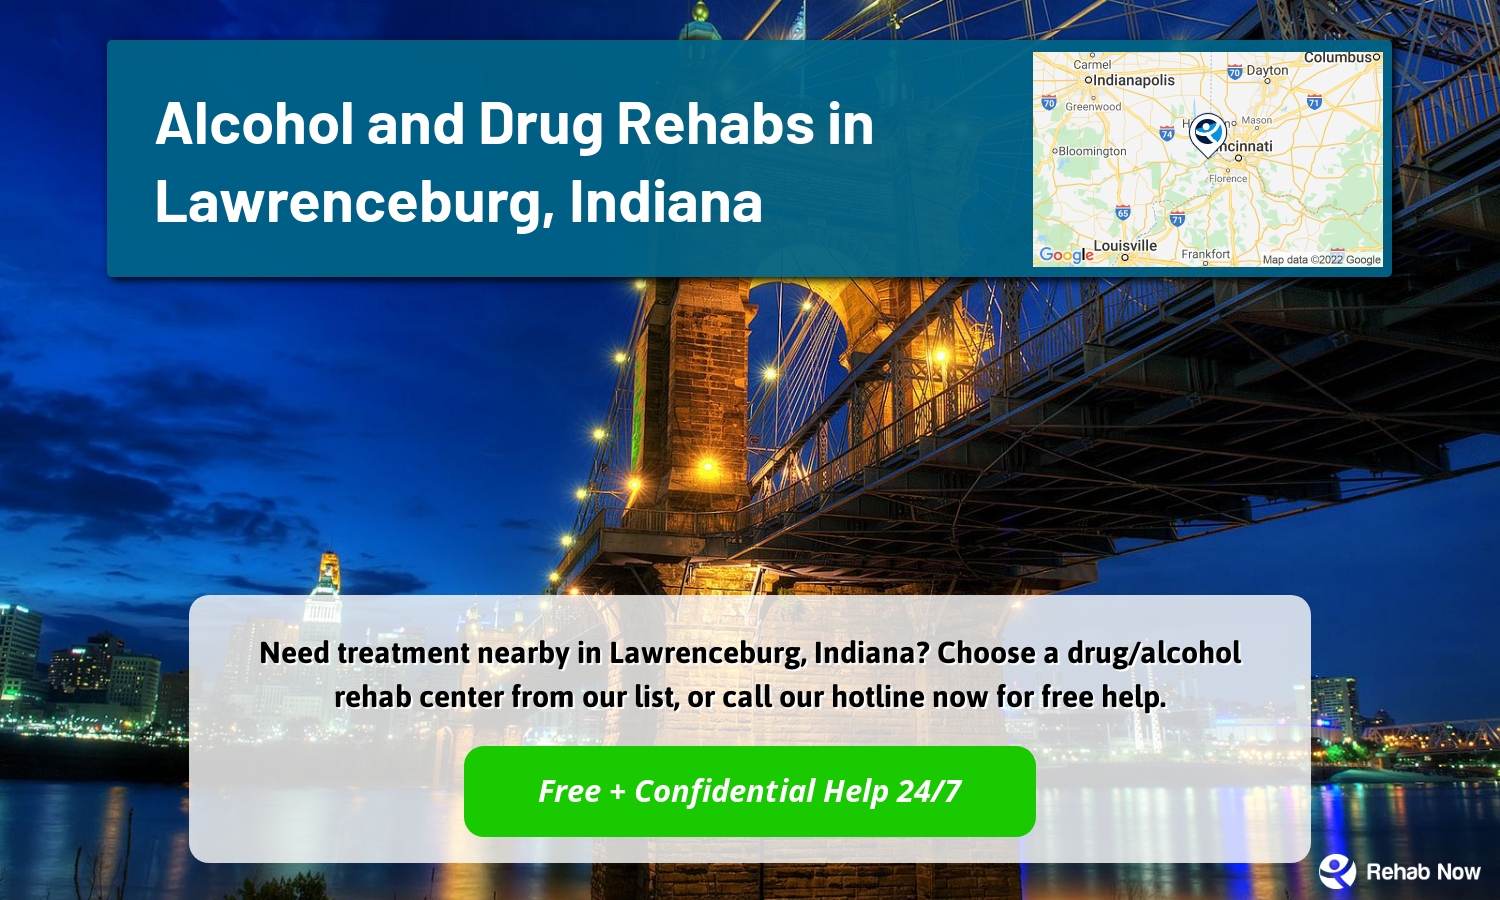 Need treatment nearby in Lawrenceburg, Indiana? Choose a drug/alcohol rehab center from our list, or call our hotline now for free help.